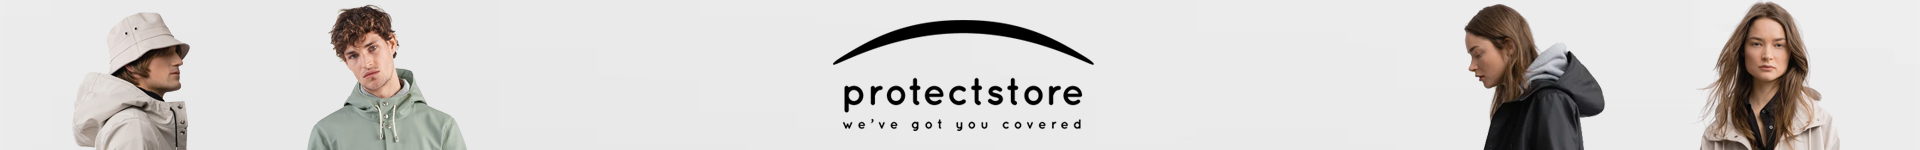 Protectstore.shops background